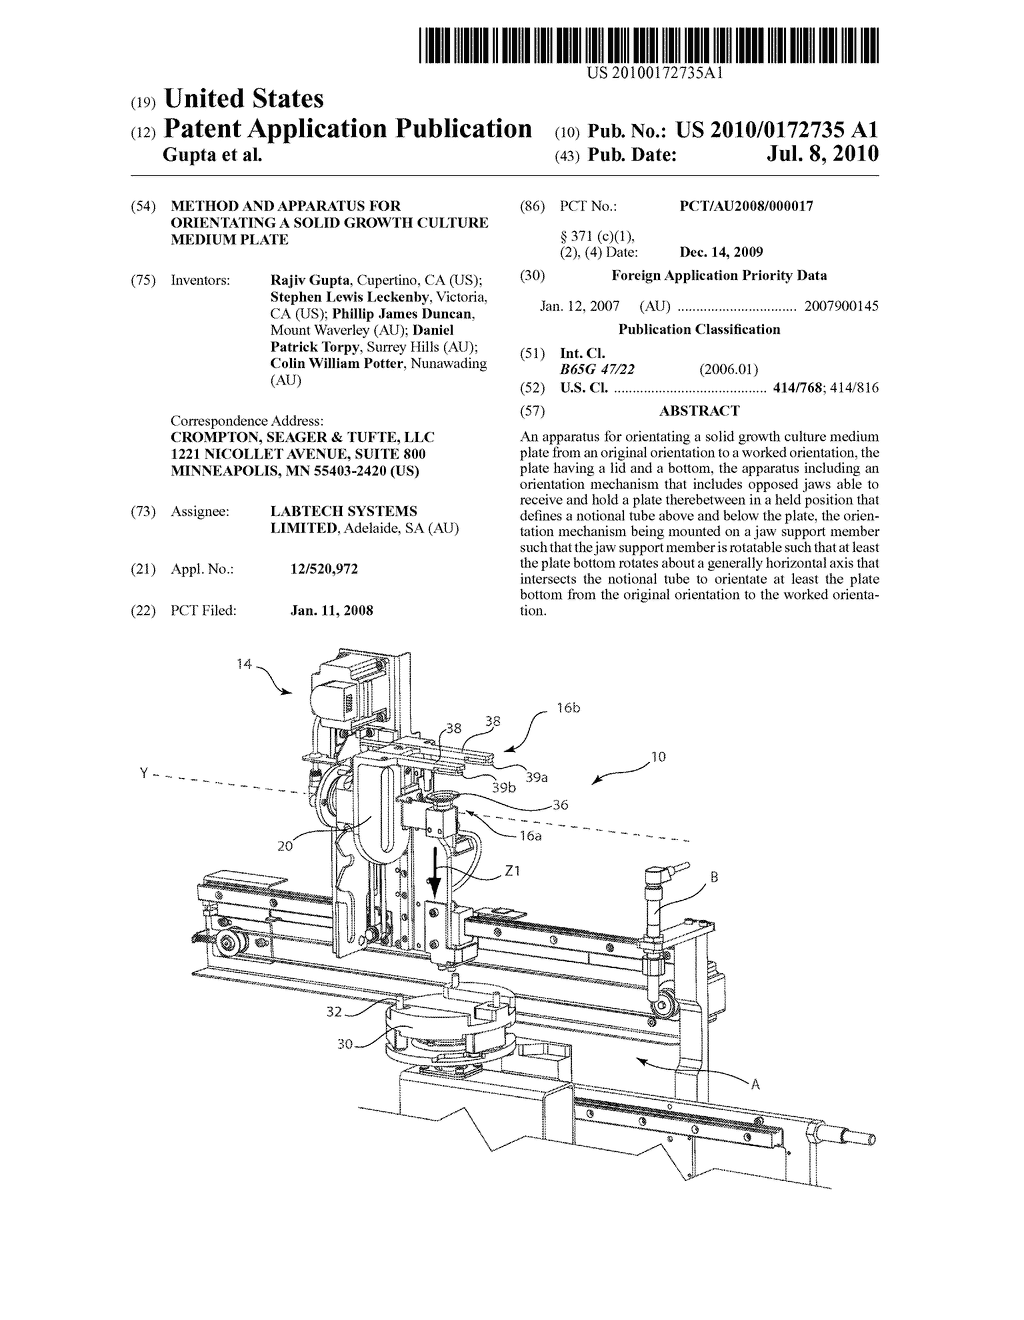 Method and Apparatus for Orientating a Solid Growth Culture Medium Plate - diagram, schematic, and image 01